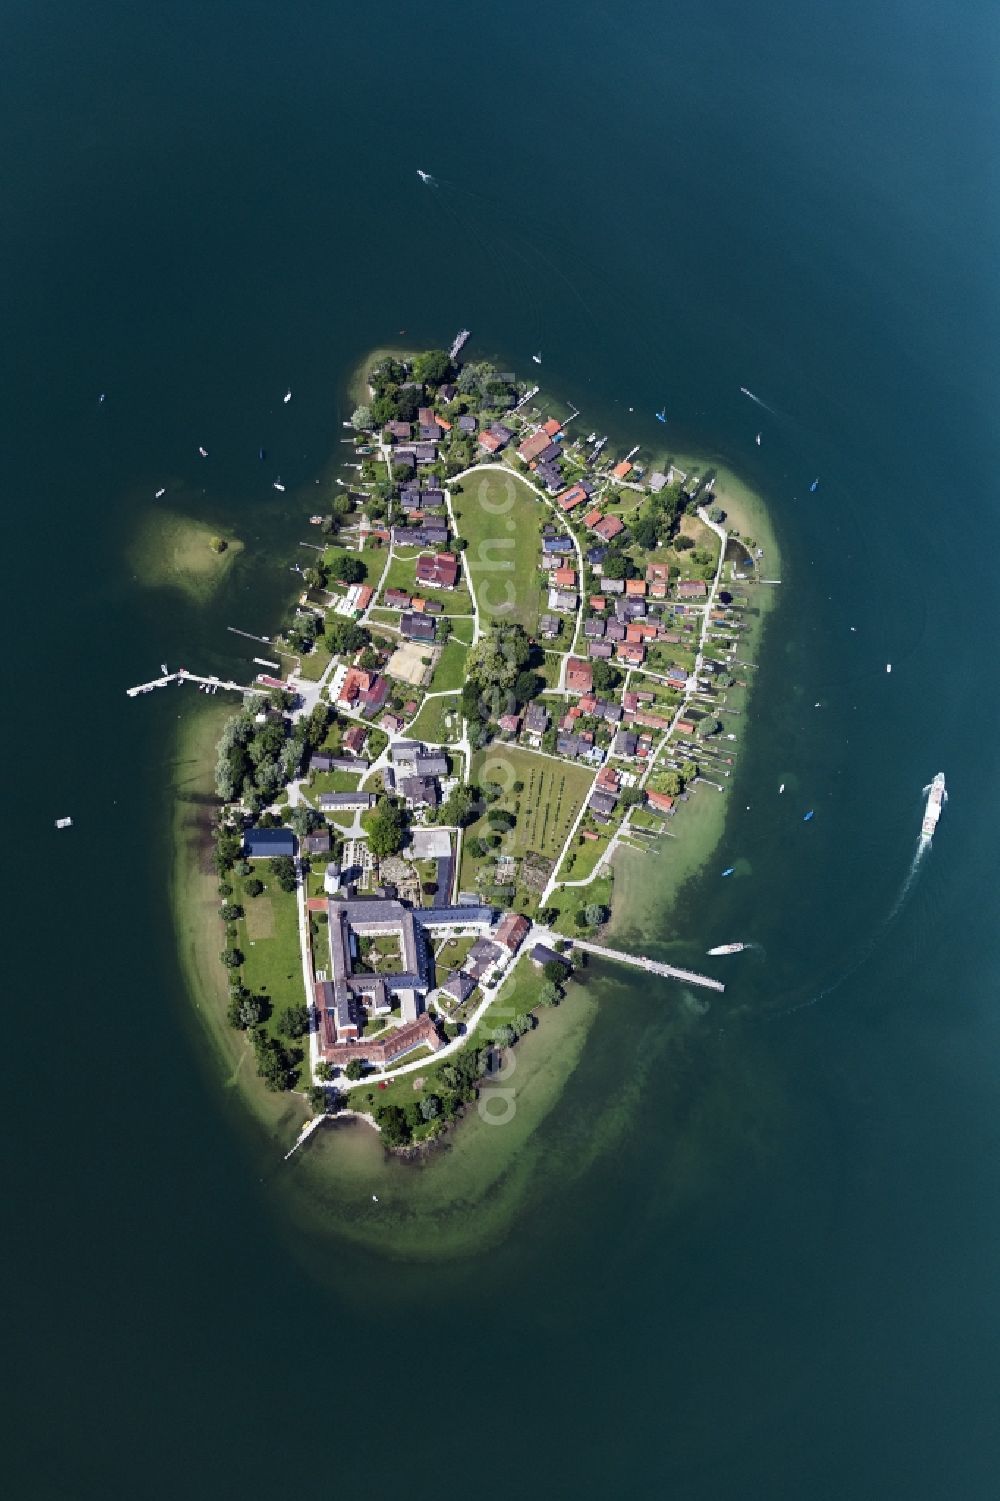 Chiemsee from above - Fraueninsel in the Chiemsee in the state of Bavaria, Germany with the abbey of the Benedictine women Frauenwoerth